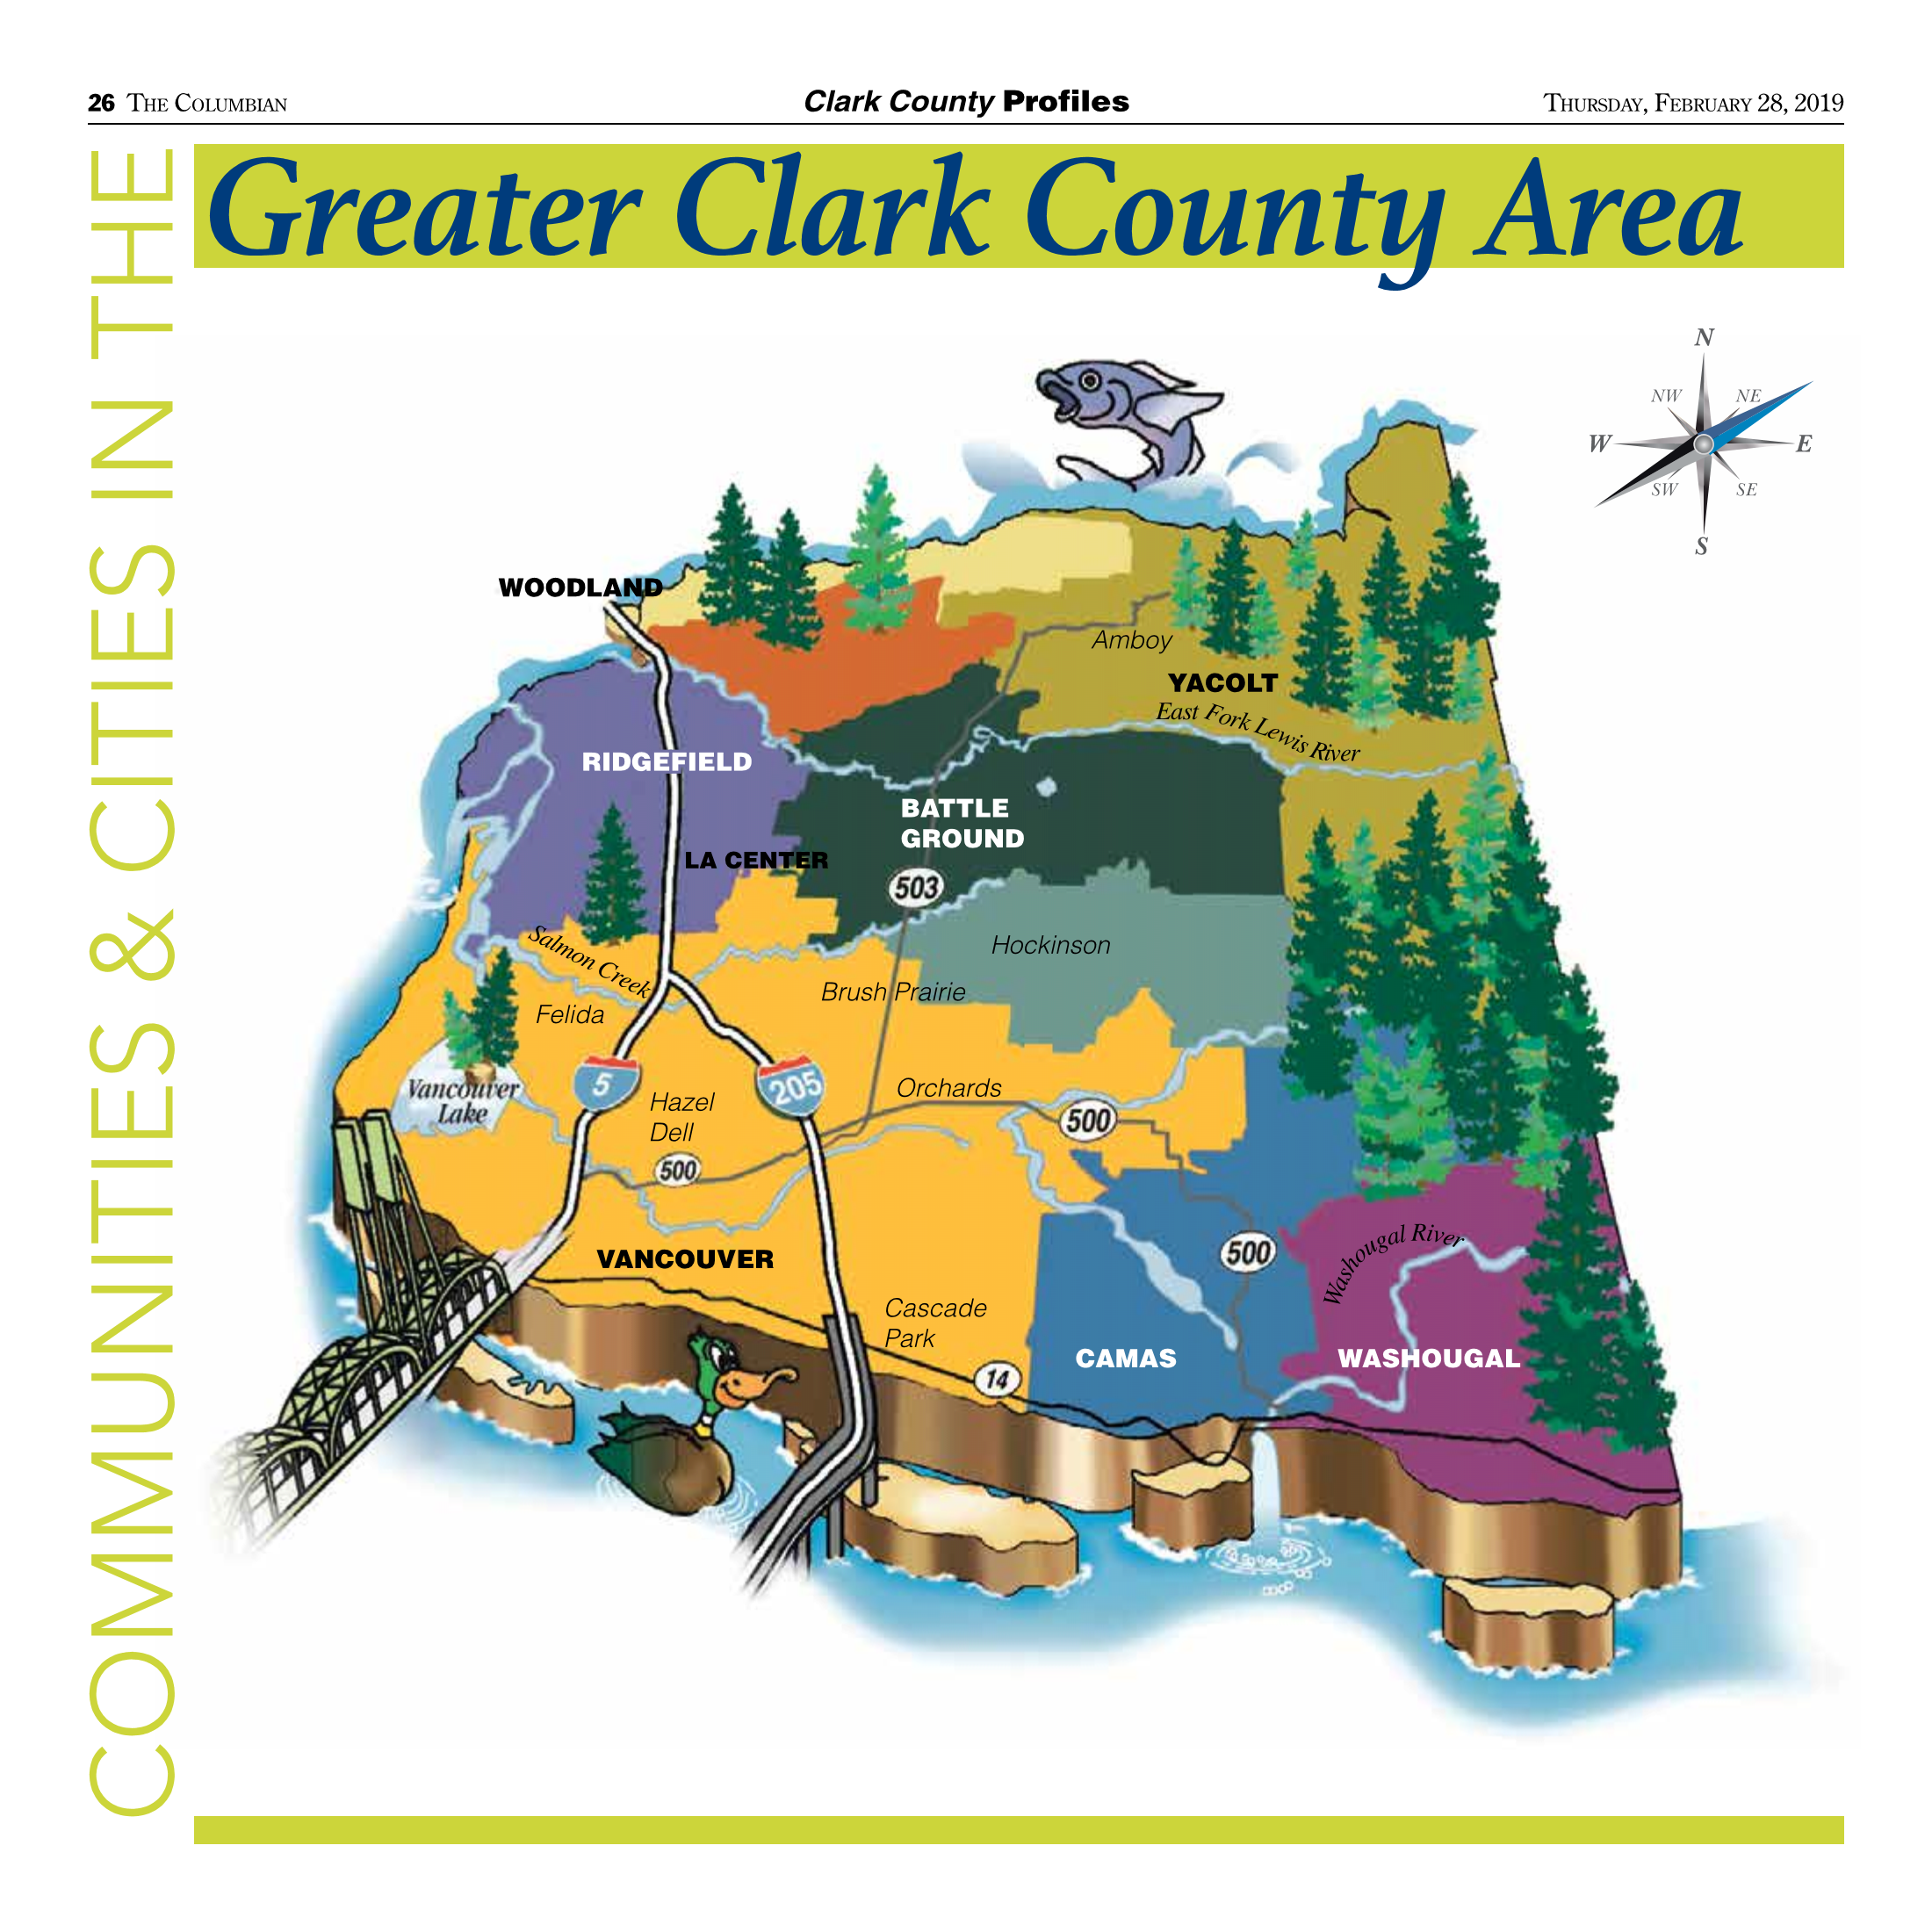 2019 Clark County Profiles_Page_26